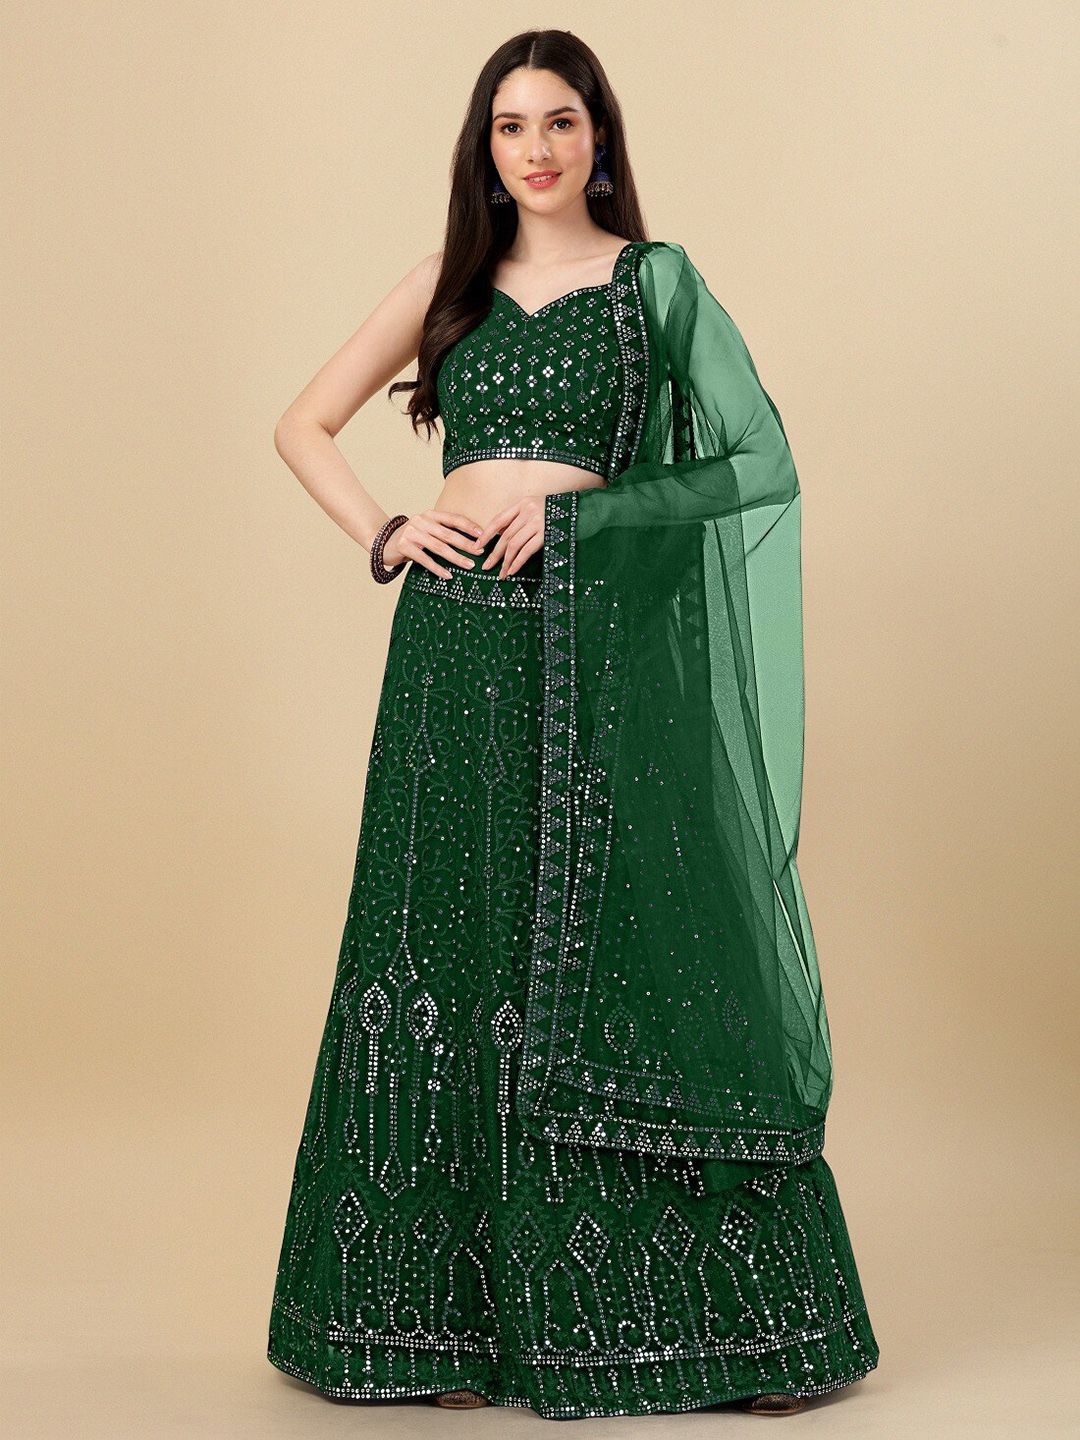 YOYO Fashion Embroidered Sequinned Semi-Stitched Lehenga & Unstitched Blouse With Dupatta Price in India